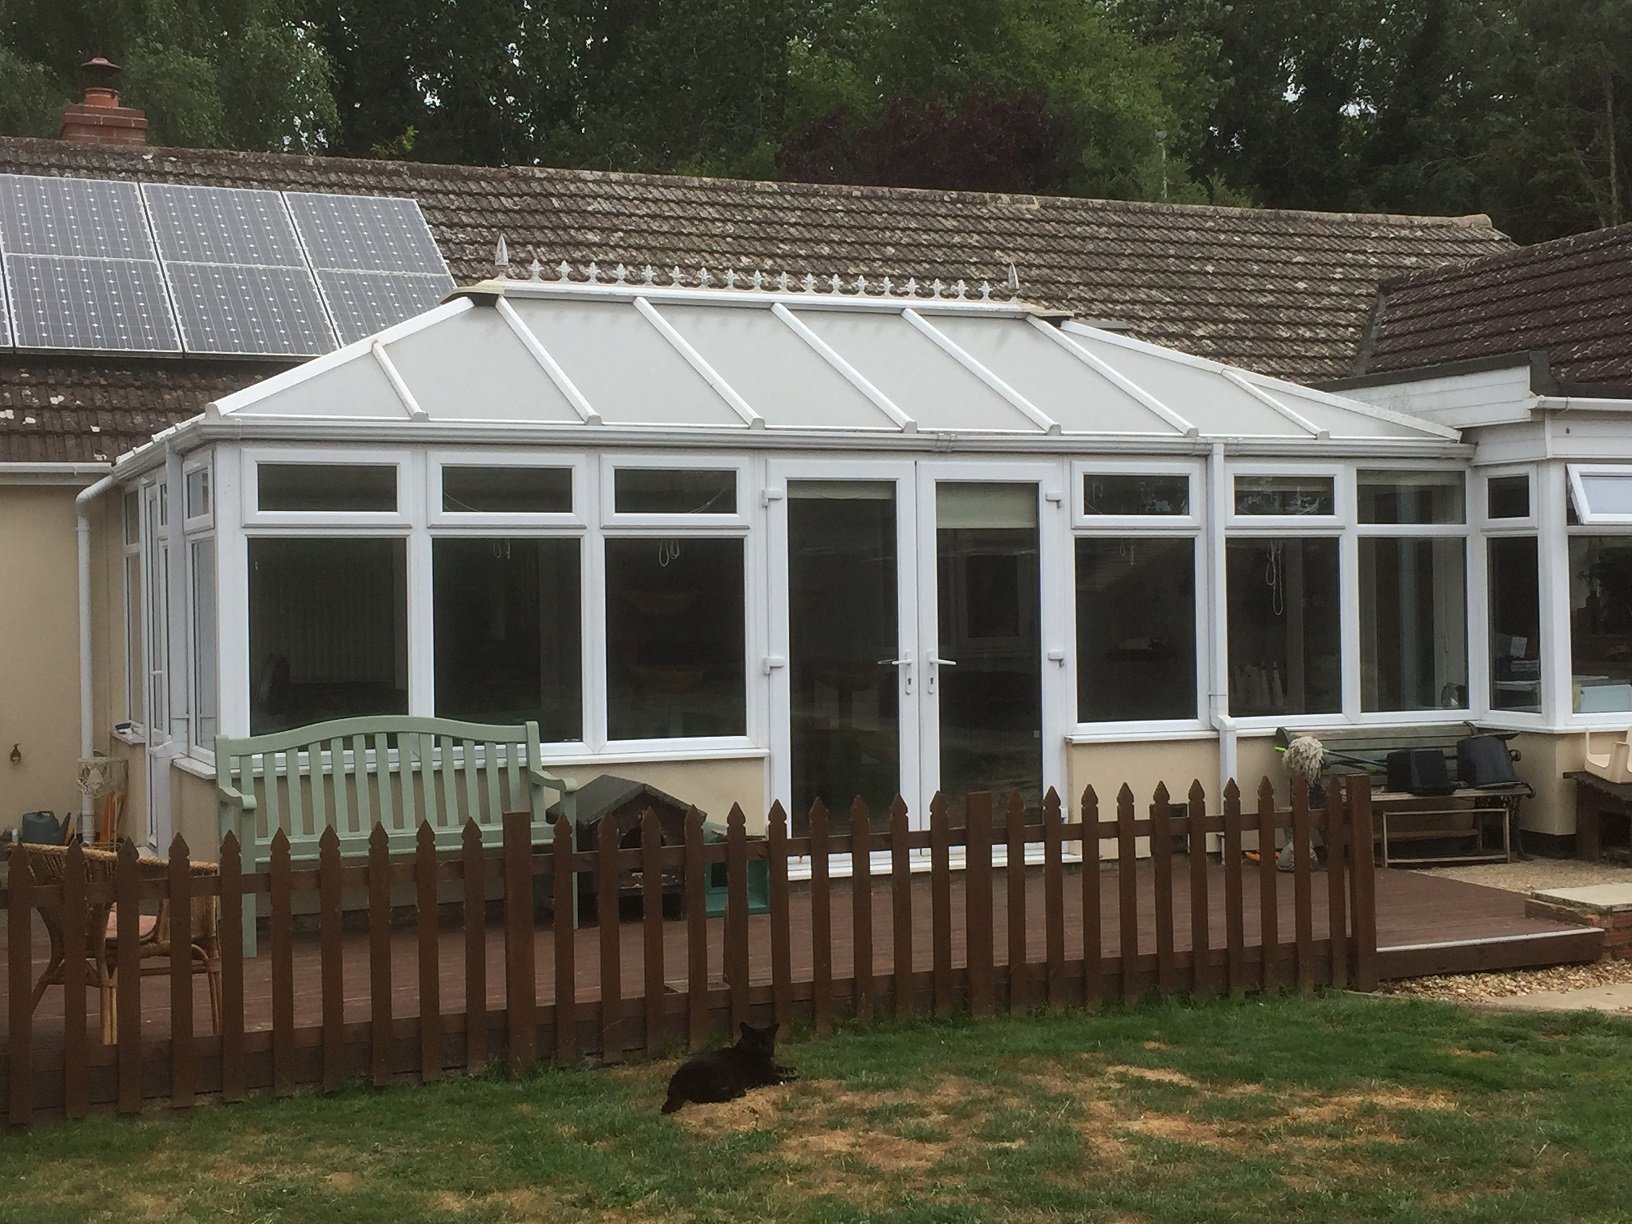 Conservatory before a Conservatory Roof Replacement